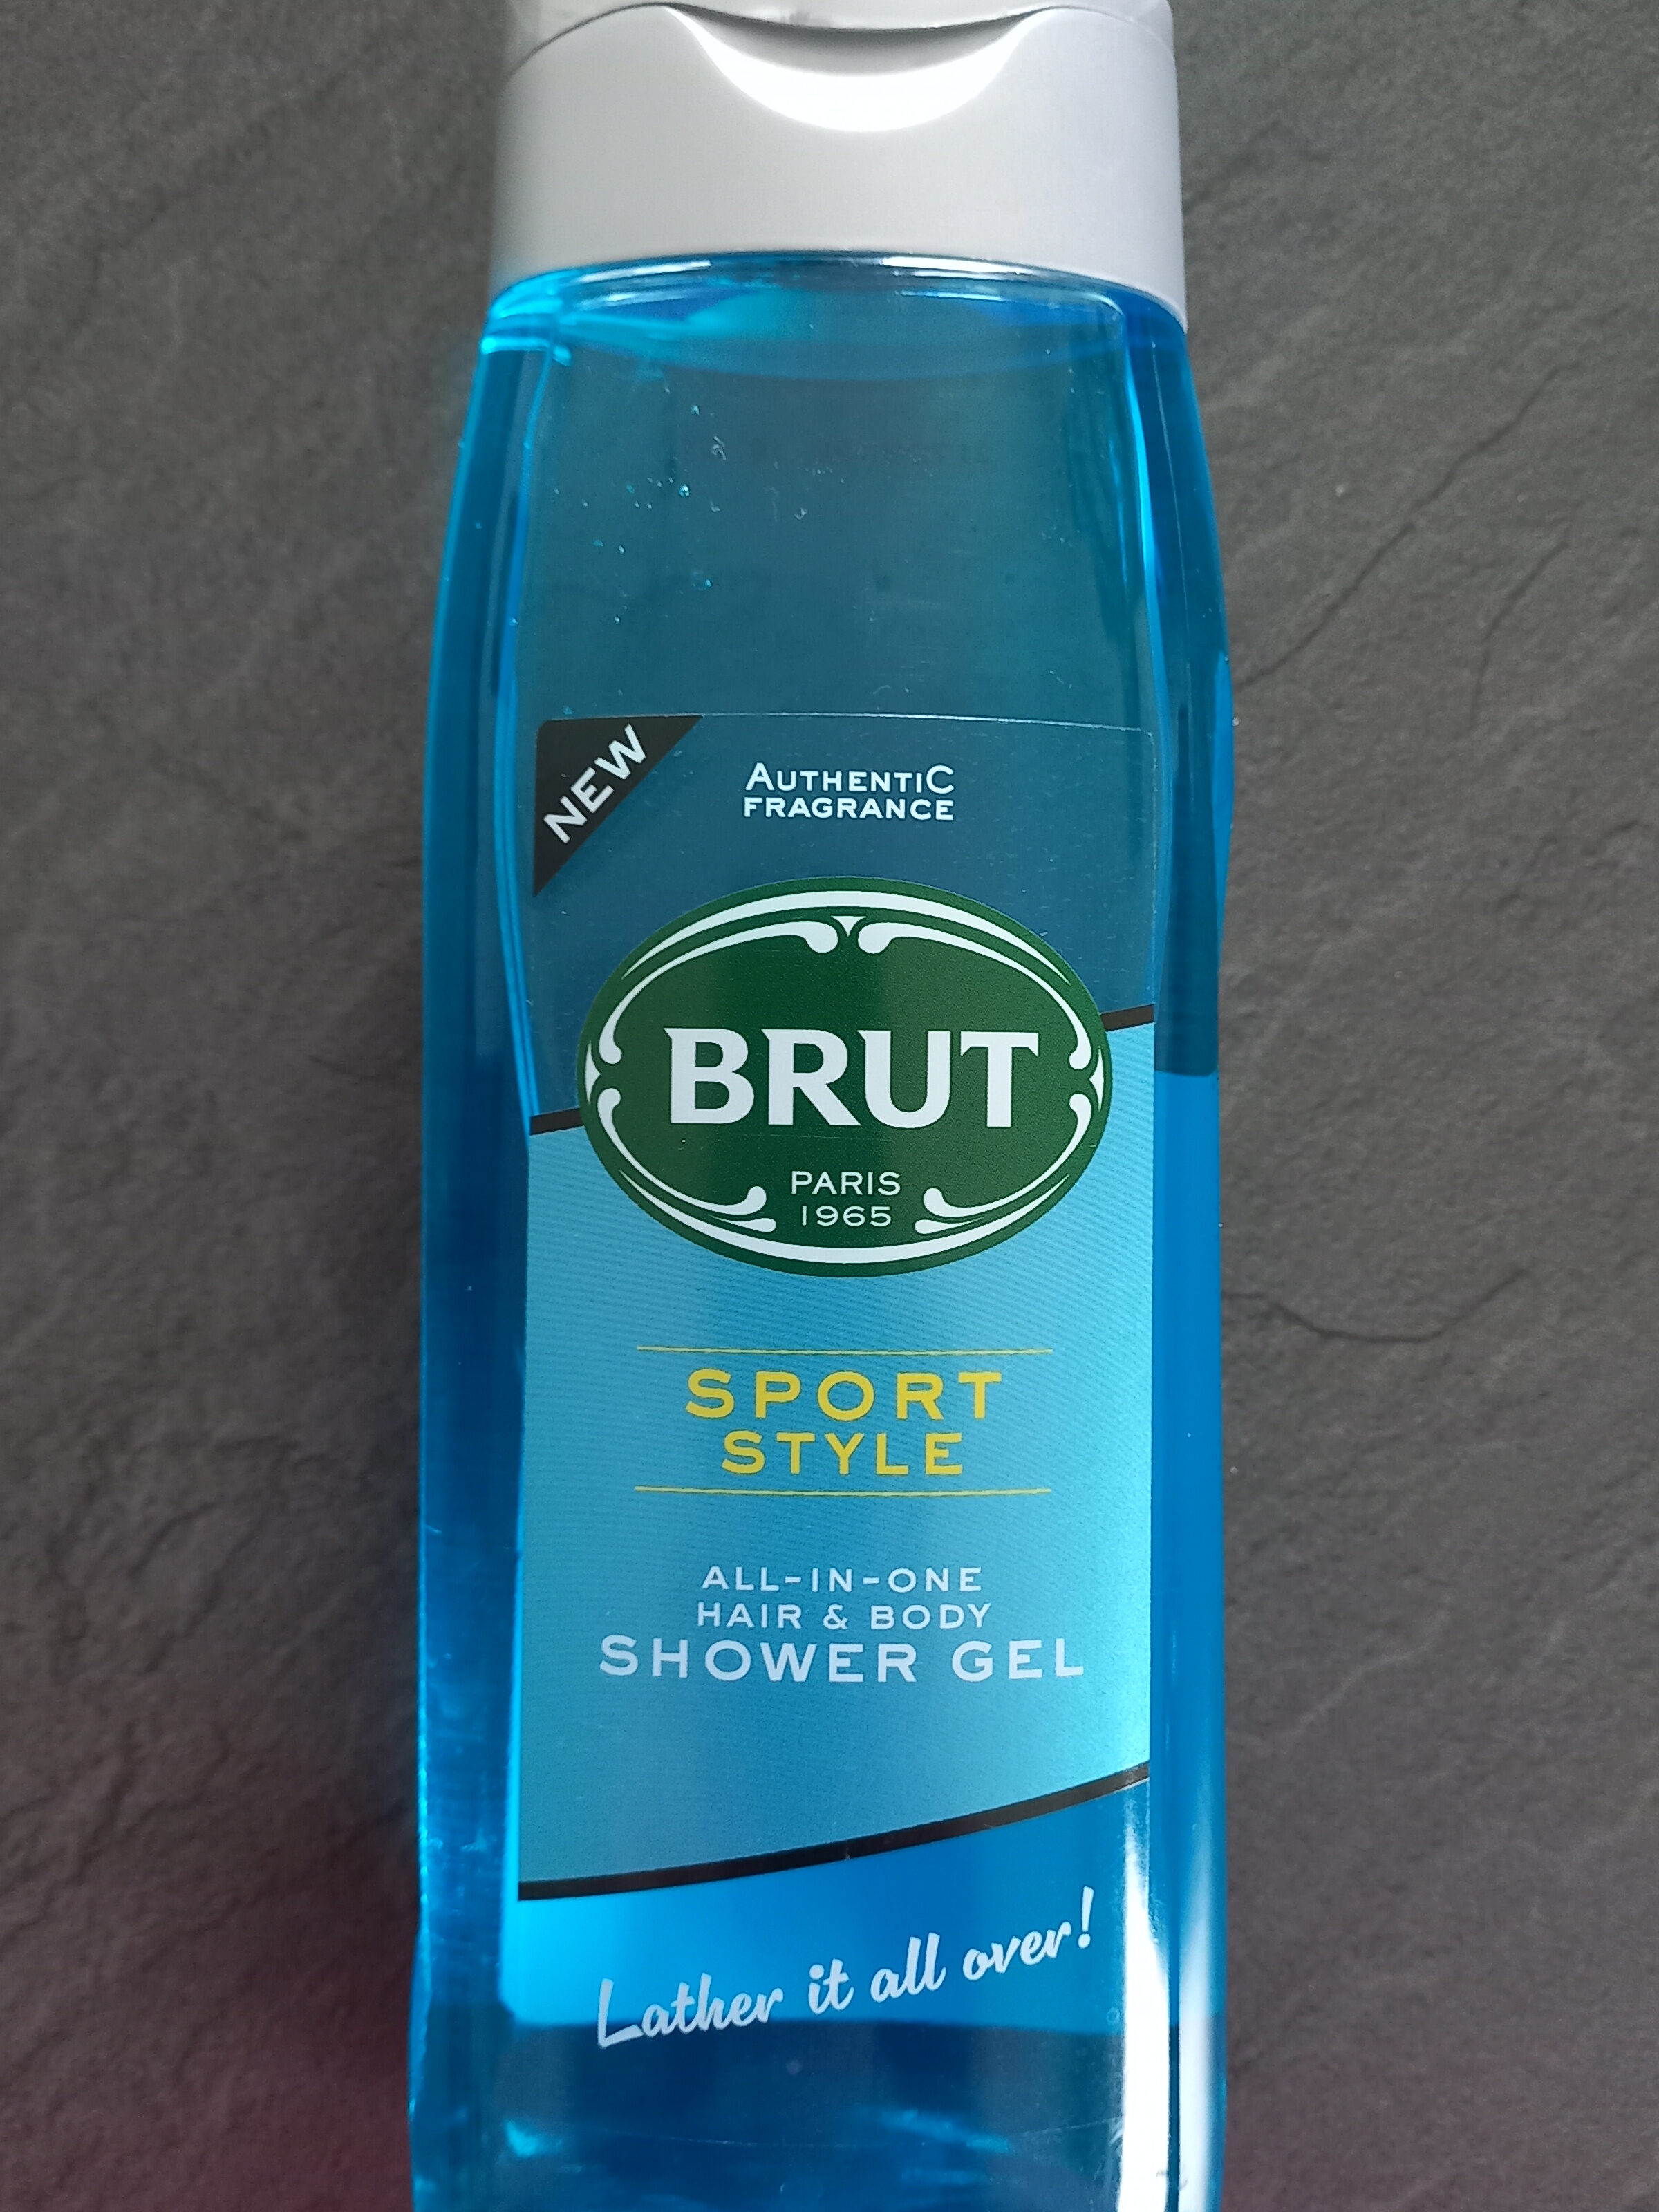 Brut Sport Style - Product - fr